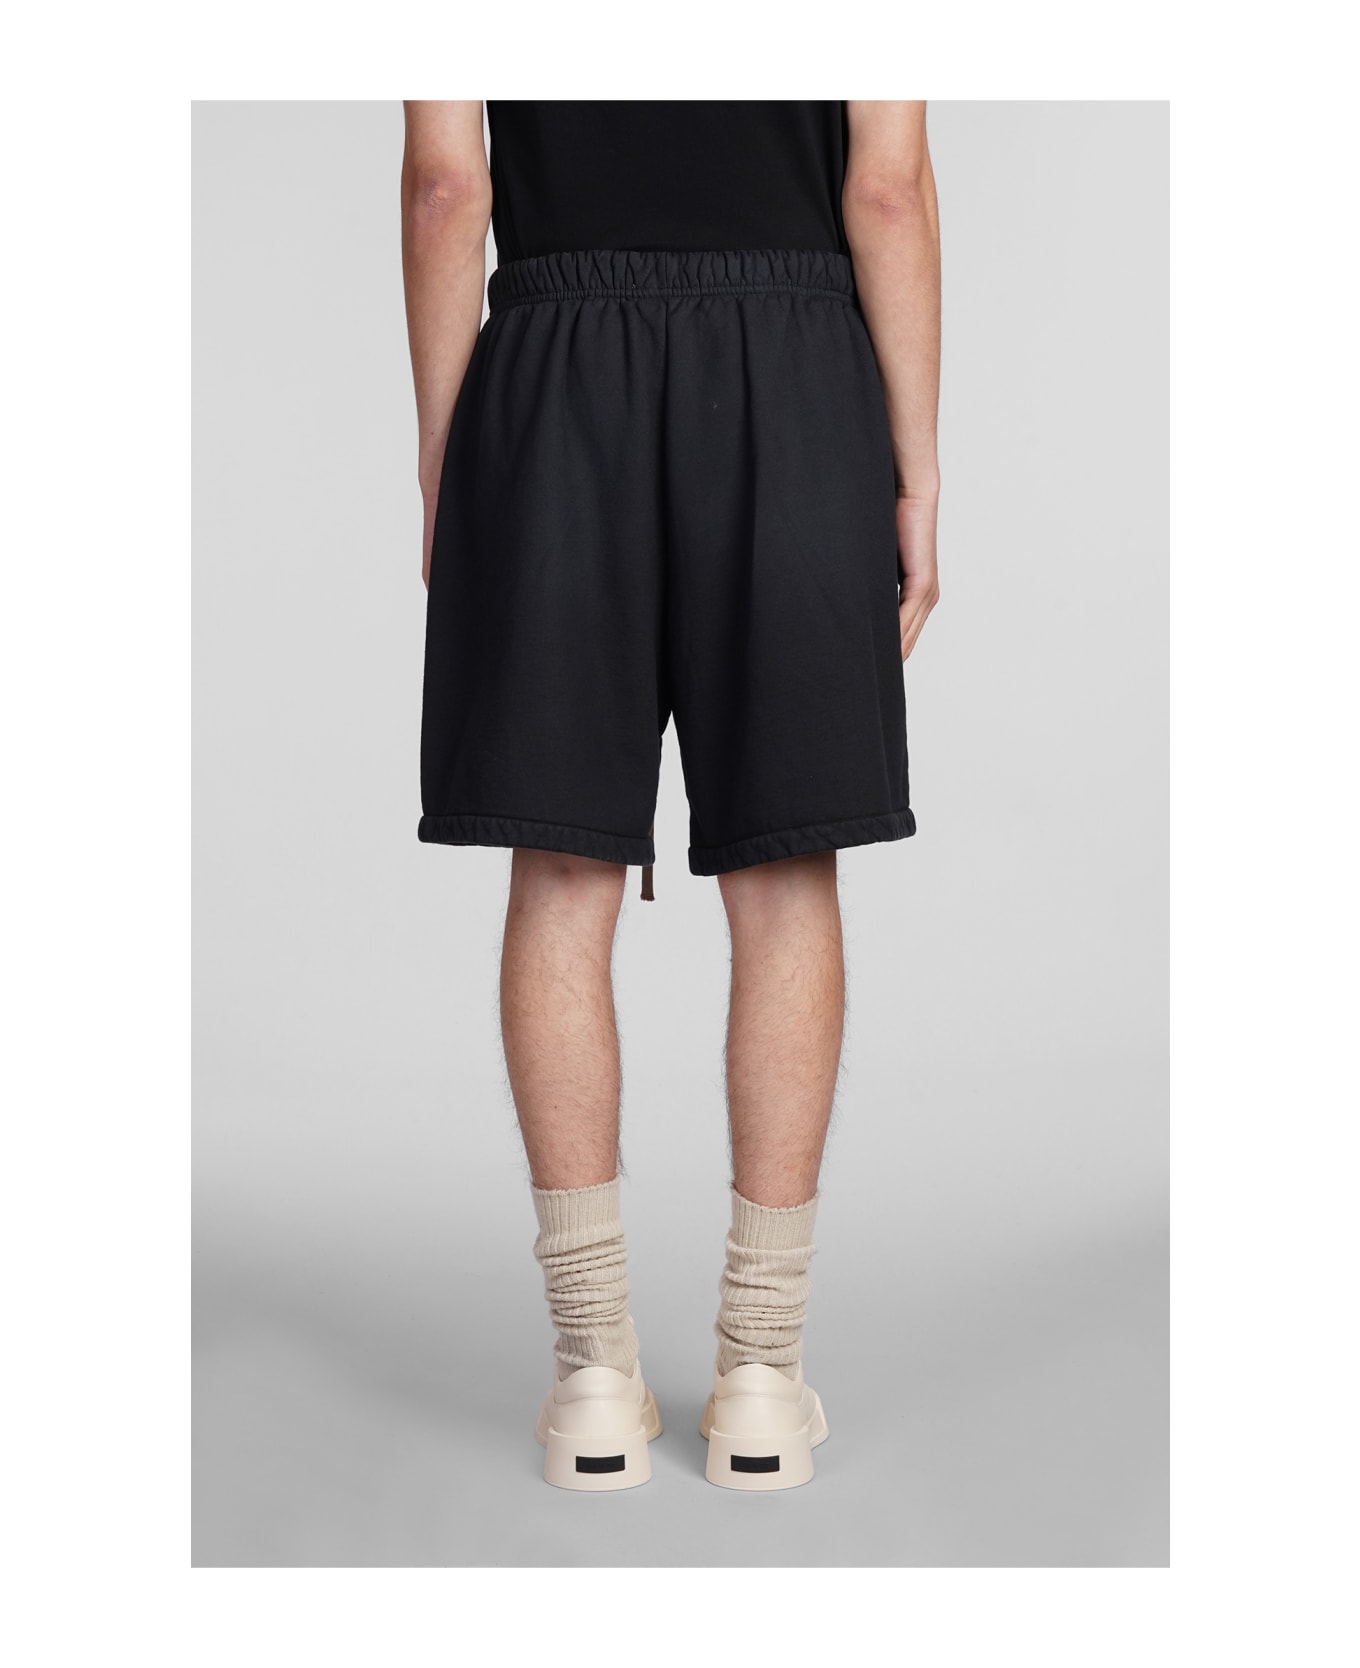 Fear of God Shorts In Black Cotton - black